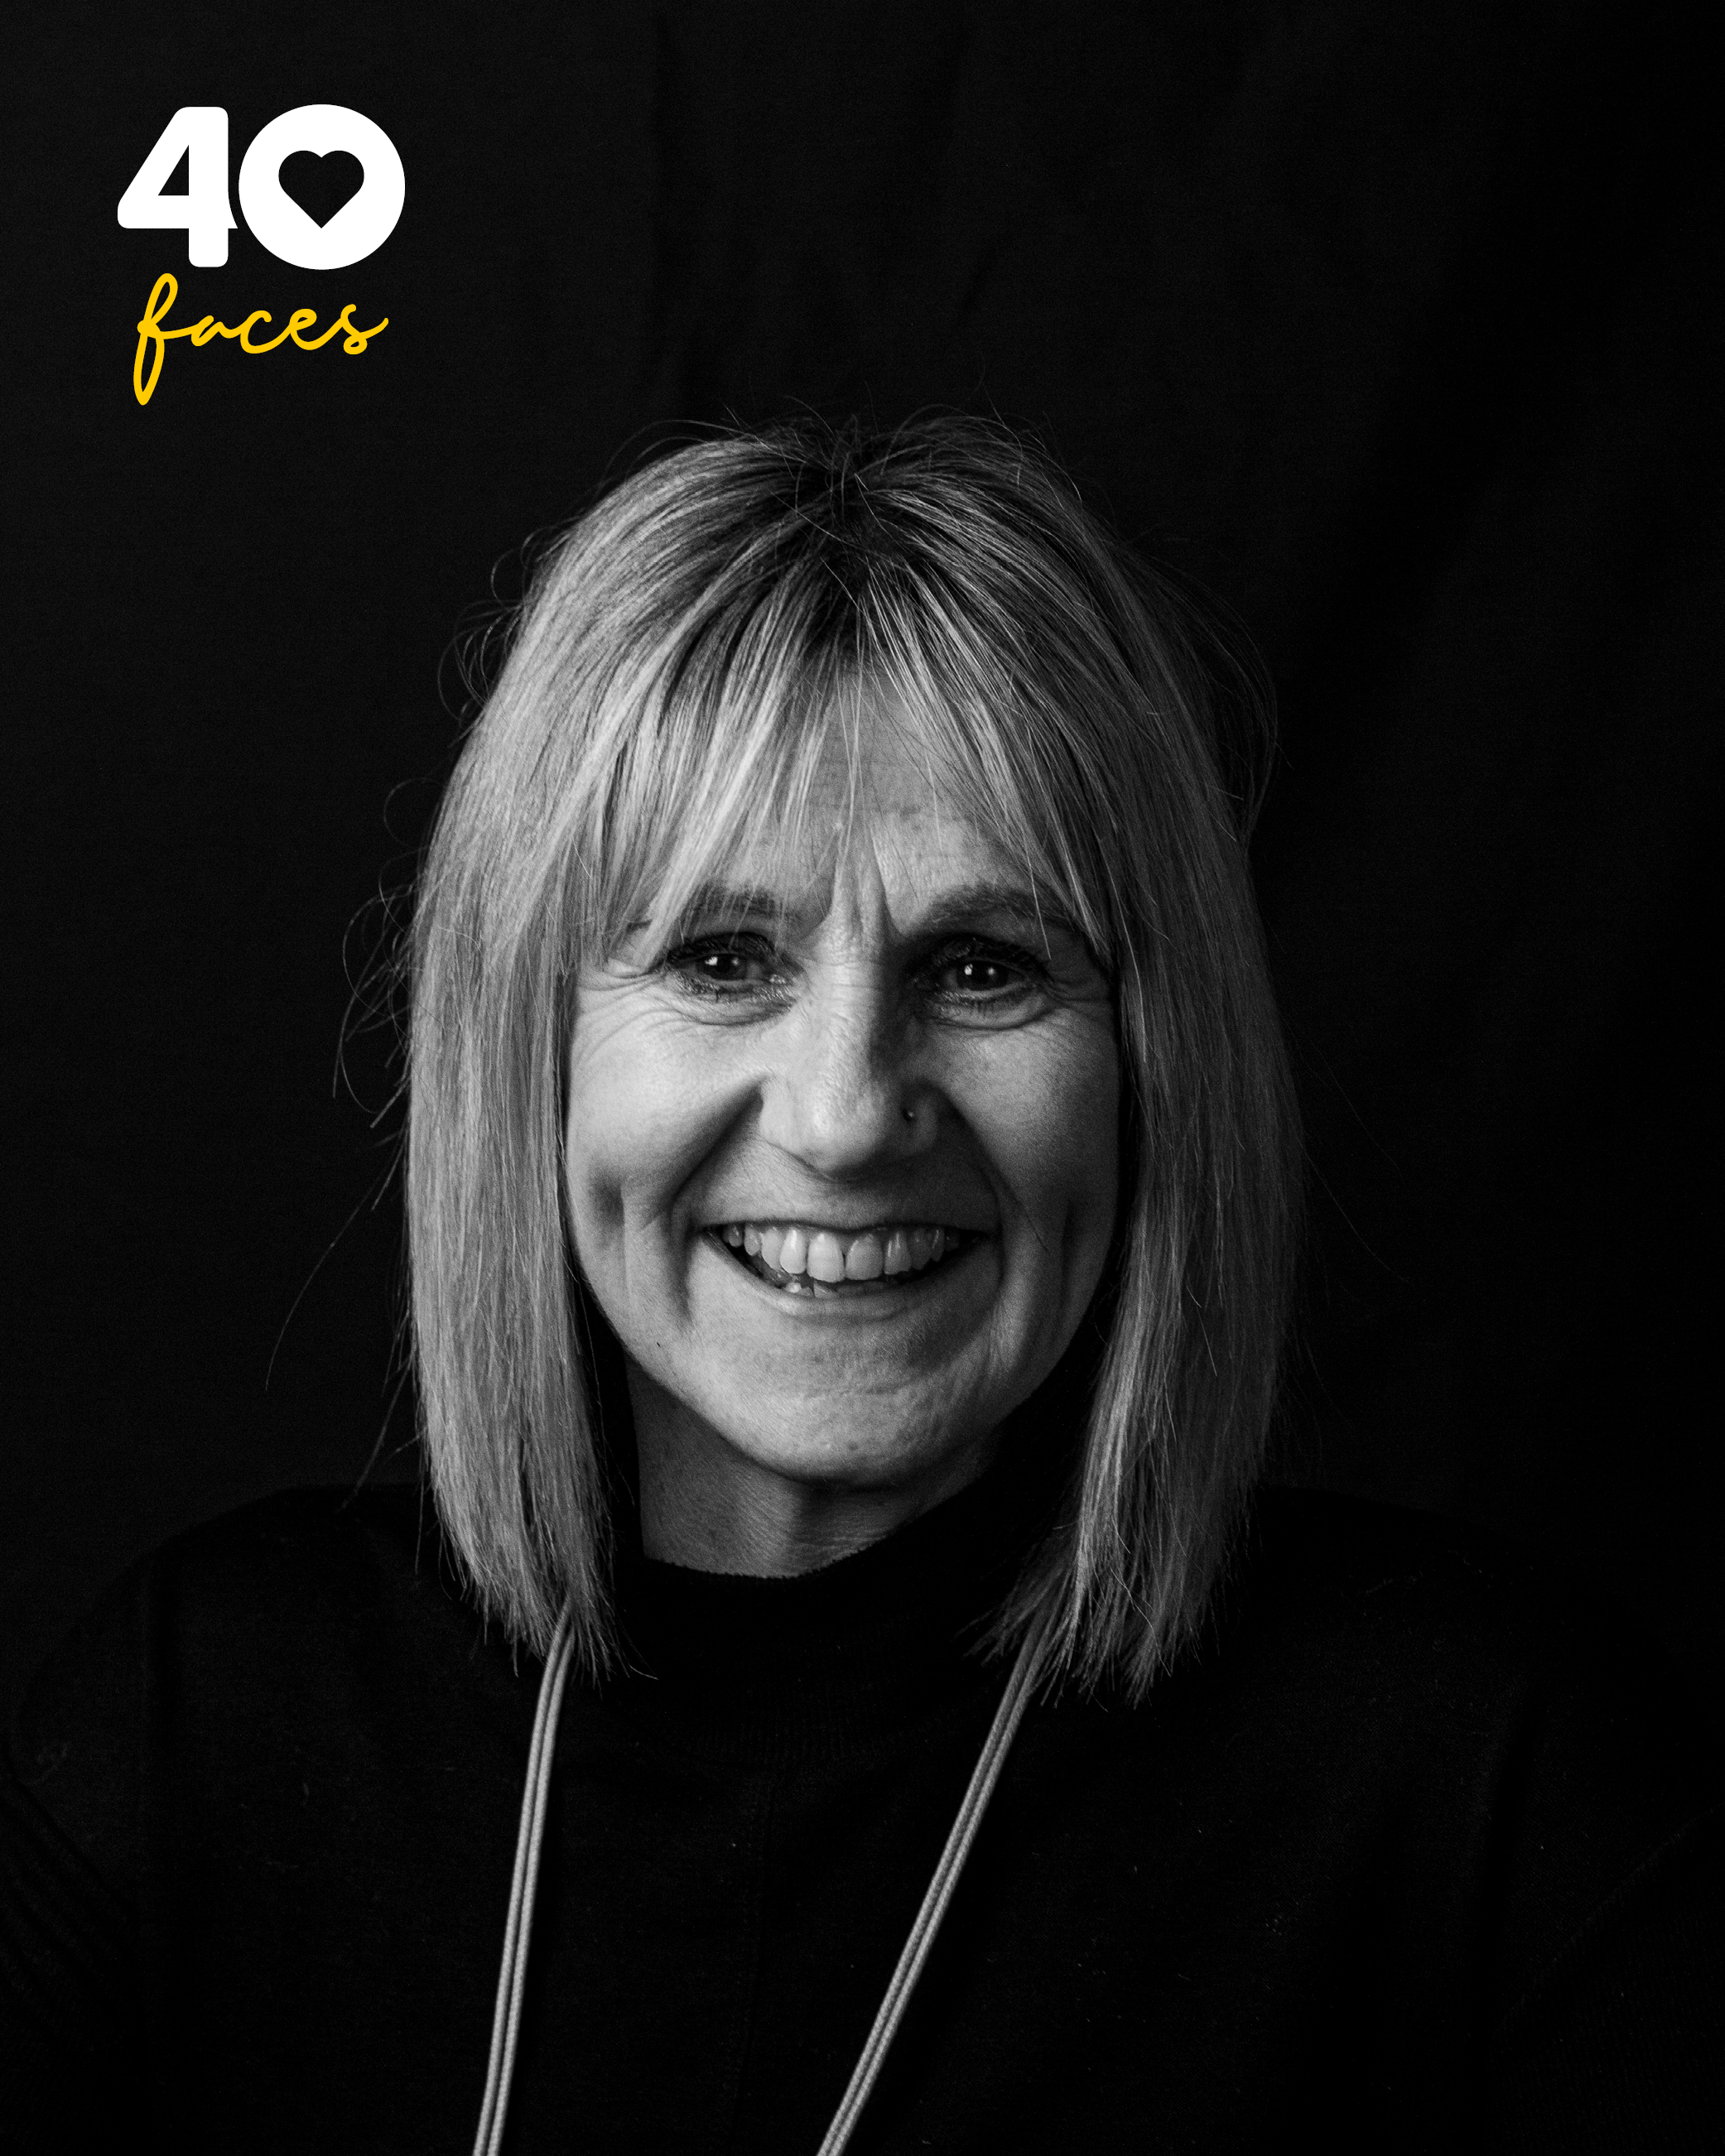 A lady, Julie Fisher, who is a supporter of St Barnabas Hospice, photographed in black and white, against a black backdrop